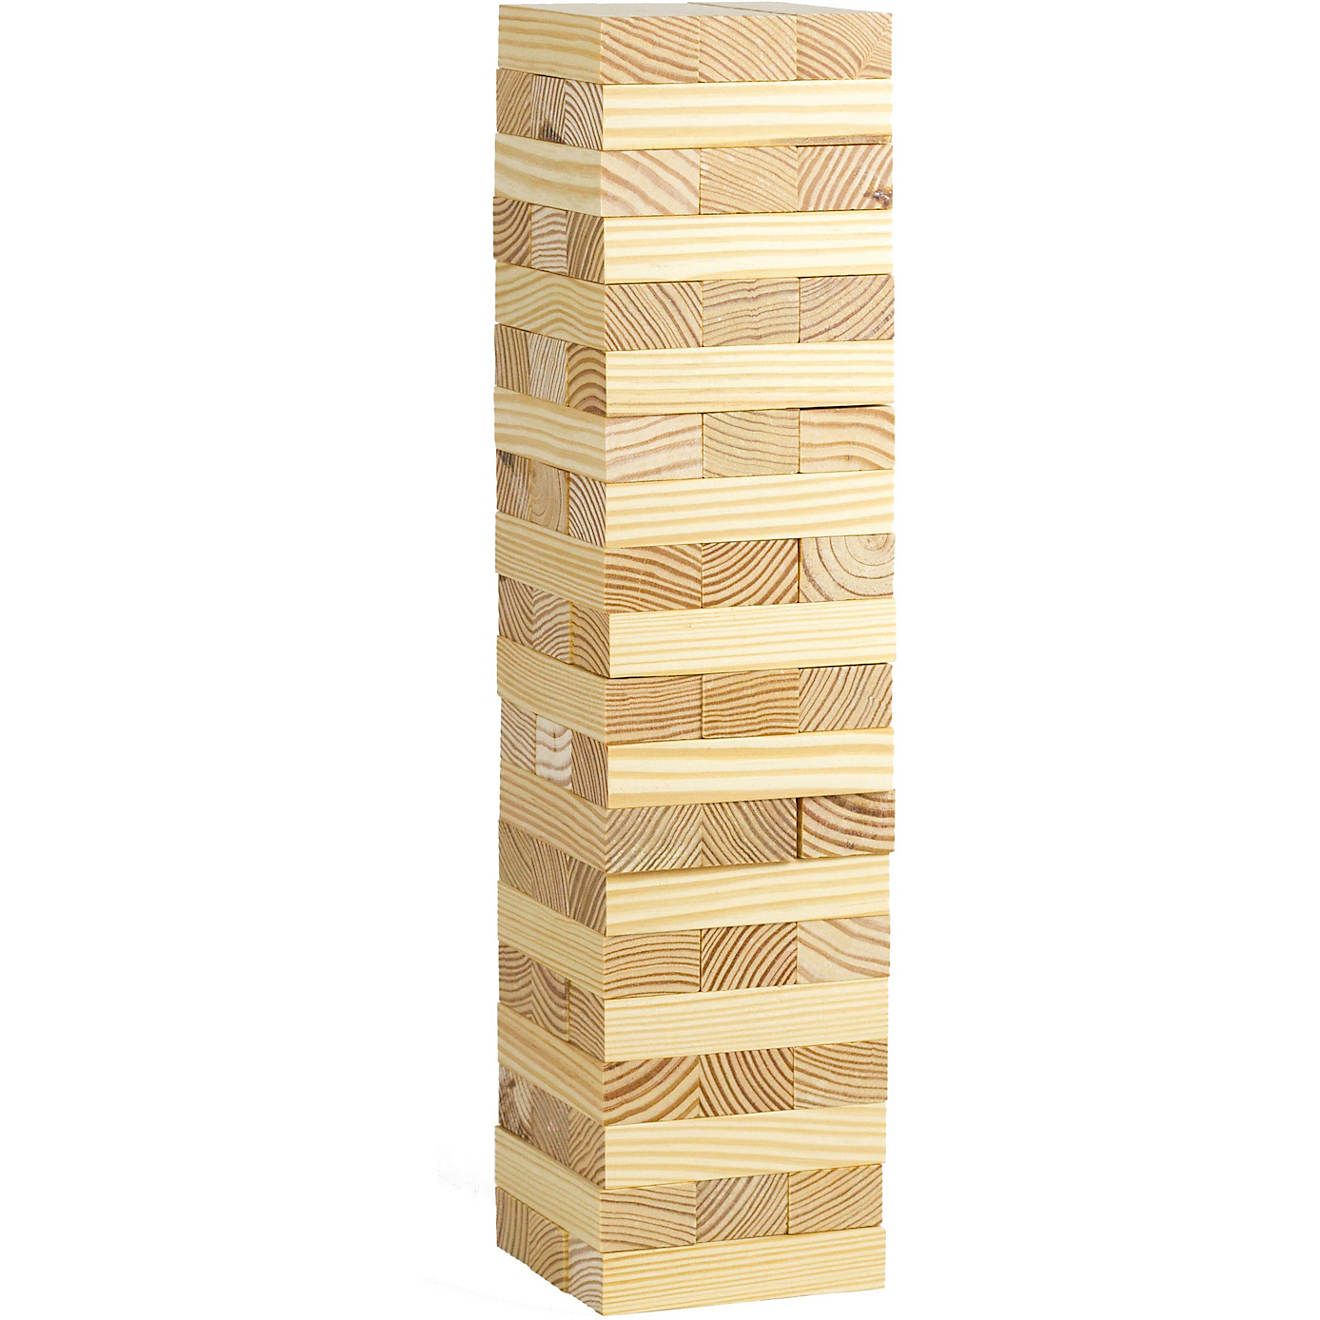 Professor Puzzle Giant Topping Tower | Academy | Academy Sports + Outdoors